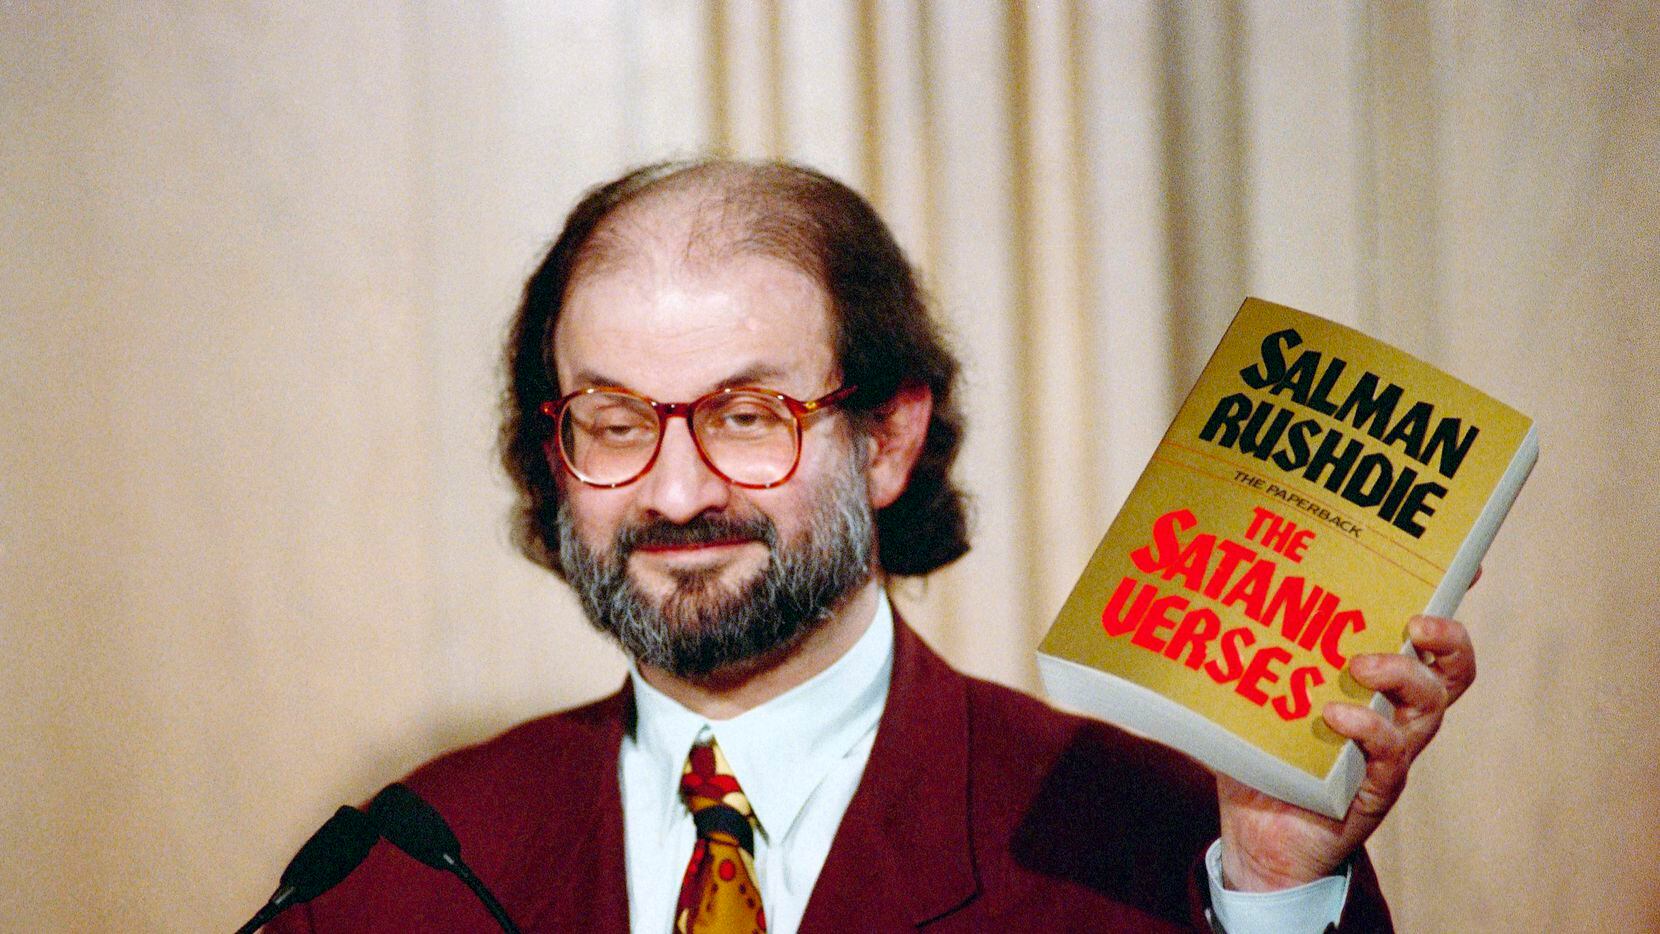 Salman Rushdie holds up a copy of his book "The Satanic Verses" at an event in Arlington,...